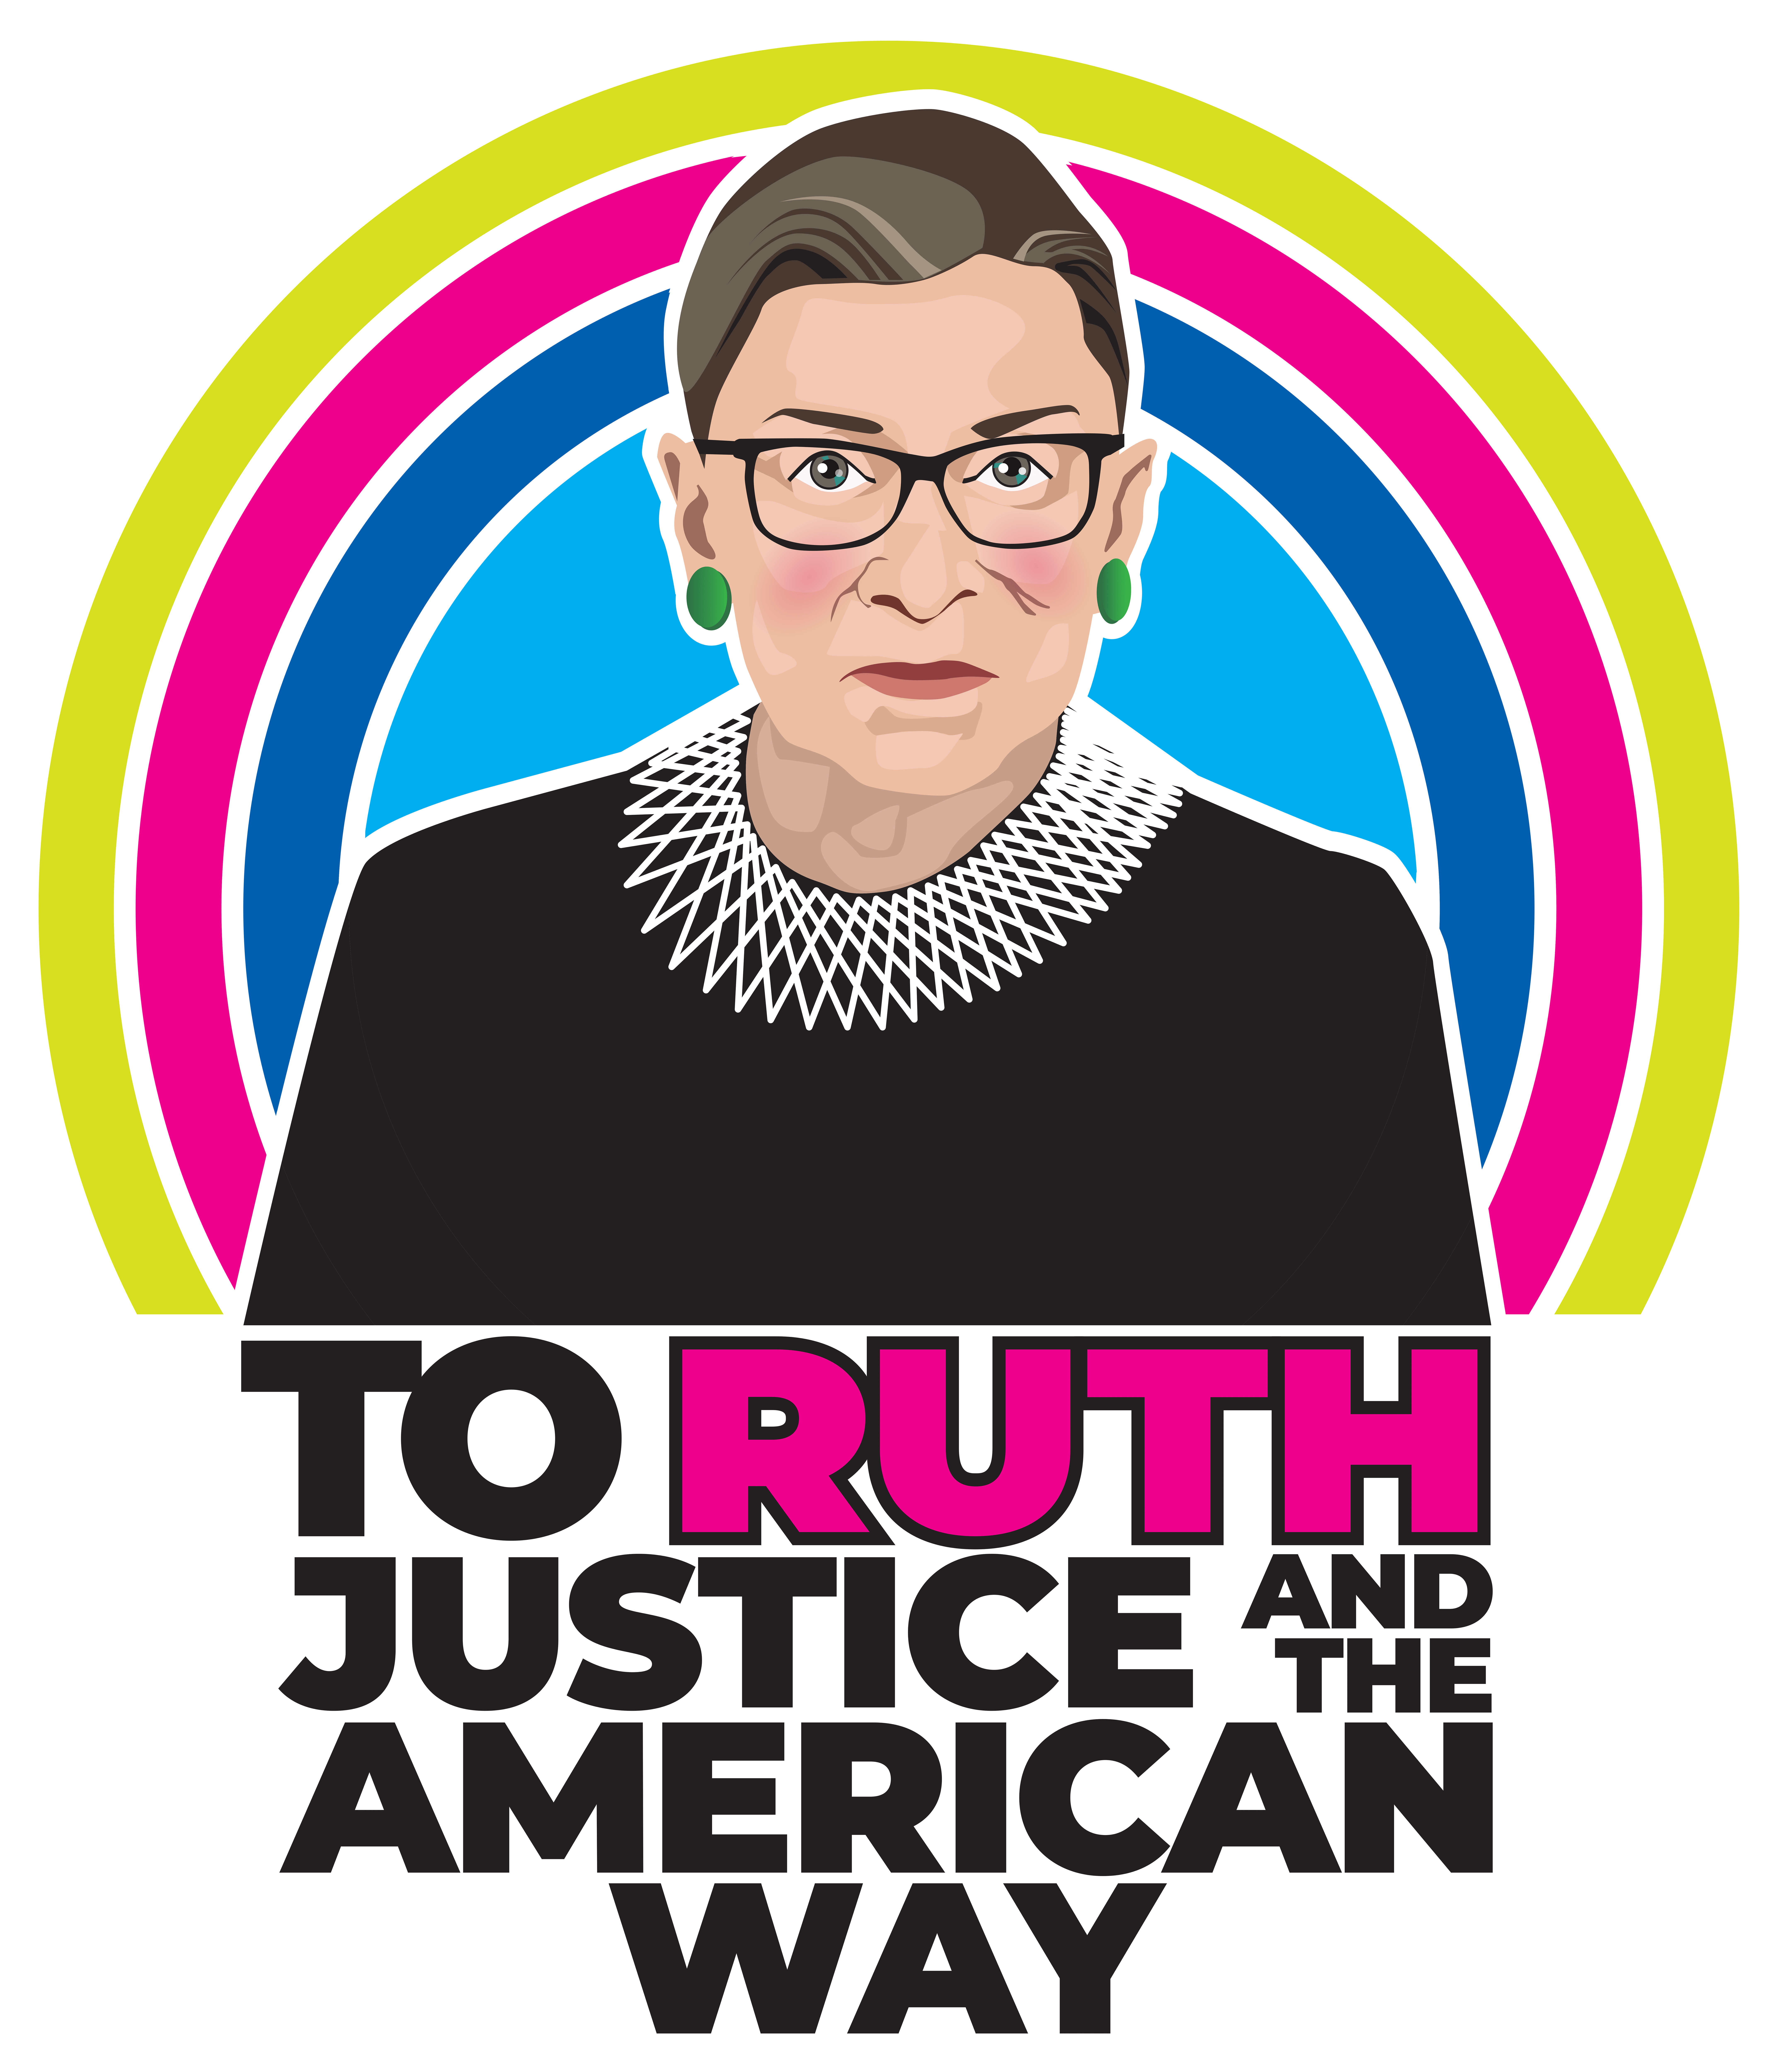 To Ruth, Justice and the American Way